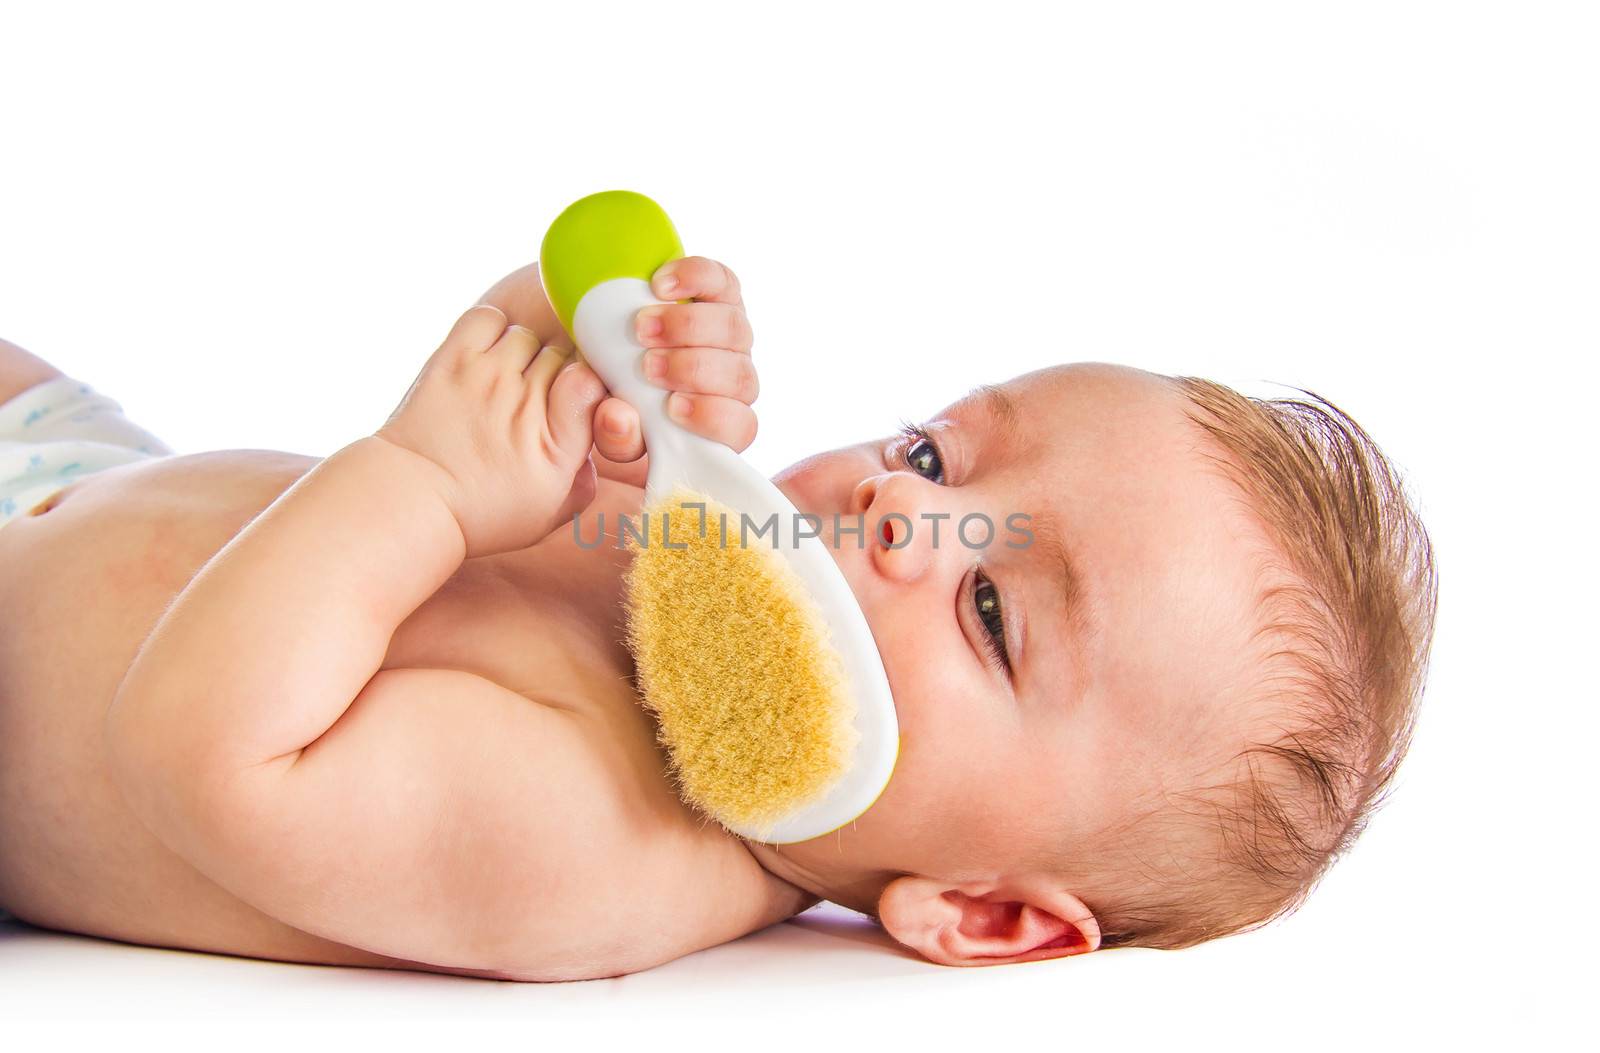 Cute baby holding an hairbrush on white